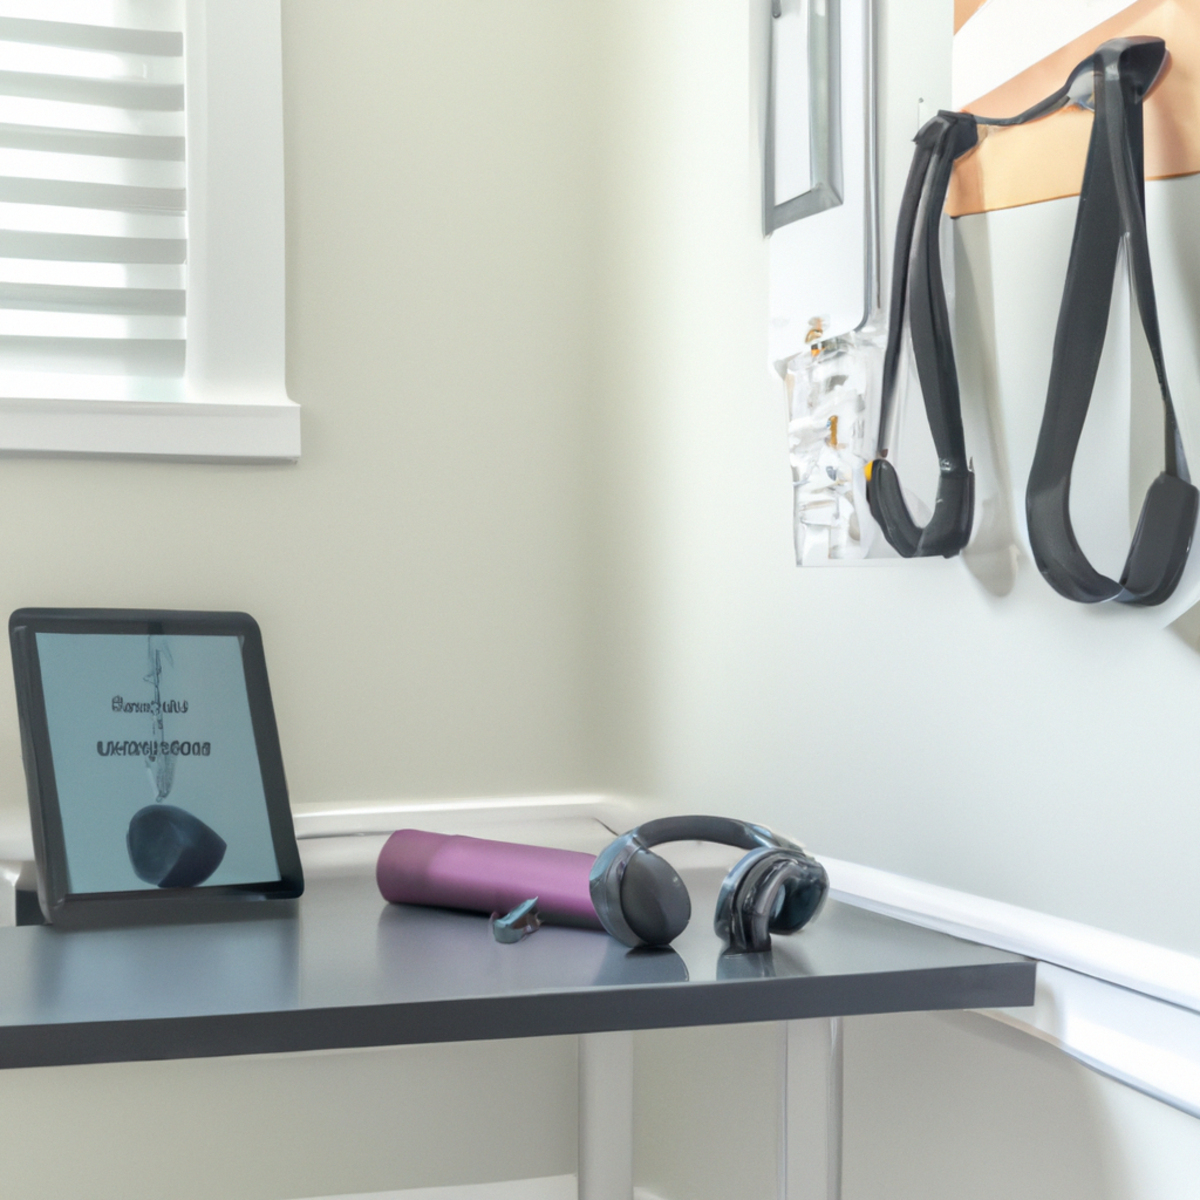 The photo captures a sleek and modern home gym setup, complete with a yoga mat, resistance bands, and dumbbells neatly arranged on a shelf. In the foreground, a tablet displaying a virtual fitness class is propped up on a stand, with a pair of wireless headphones nearby. The lighting is bright and natural, creating an inviting and energizing atmosphere. The attention to detail in the arrangement of the objects suggests a deliberate and thoughtful approach to fitness, with technology seamlessly integrated into the workout routine.